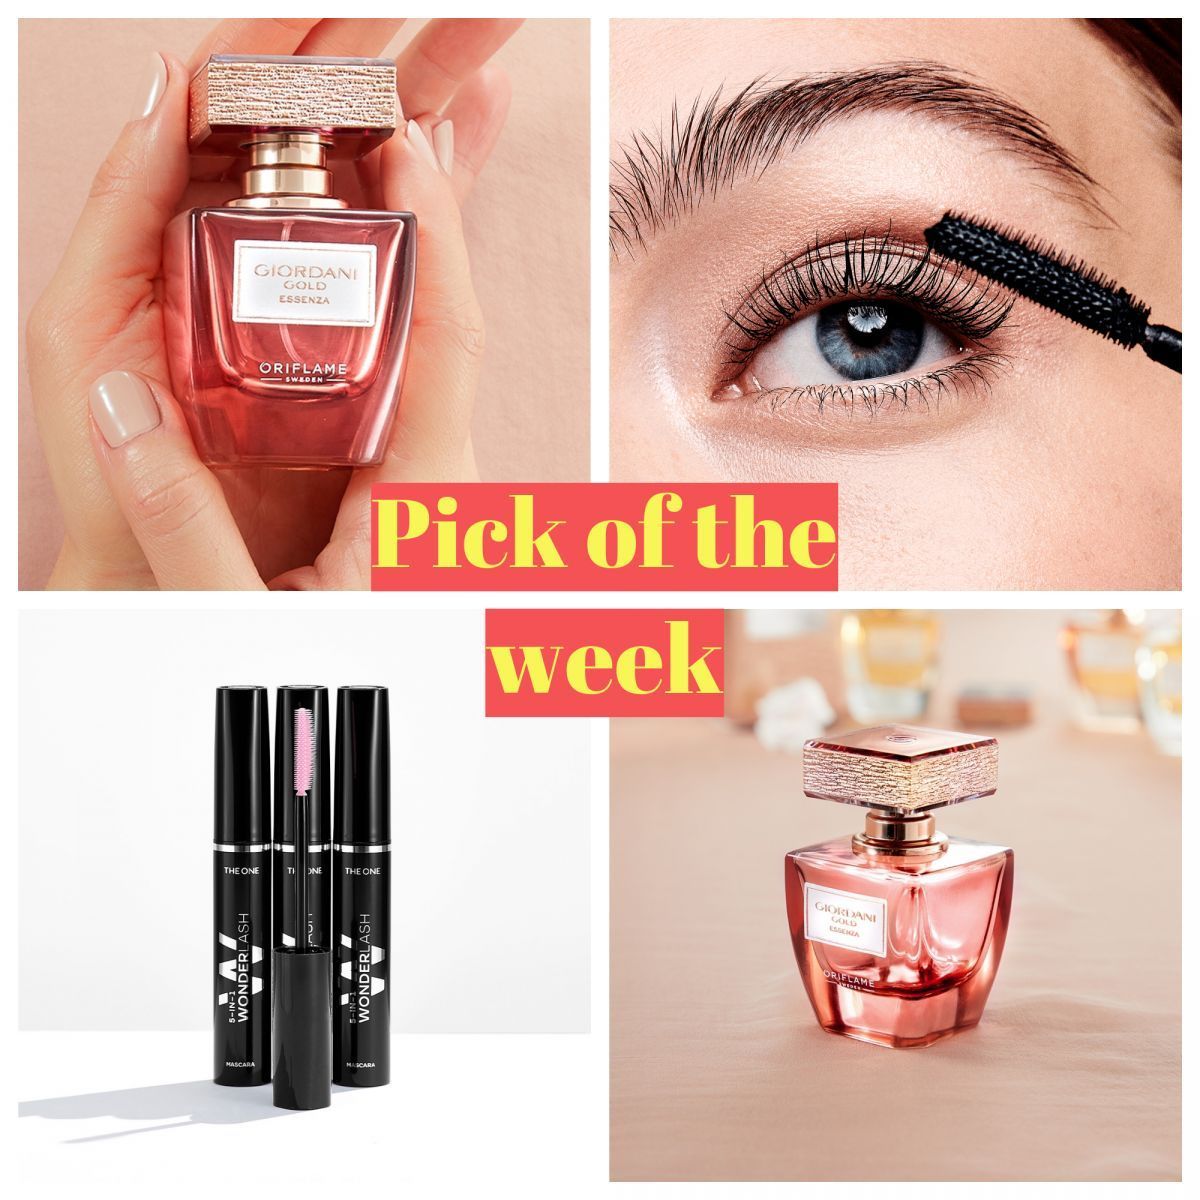 Pick of the week: новинки бренда Oriflame